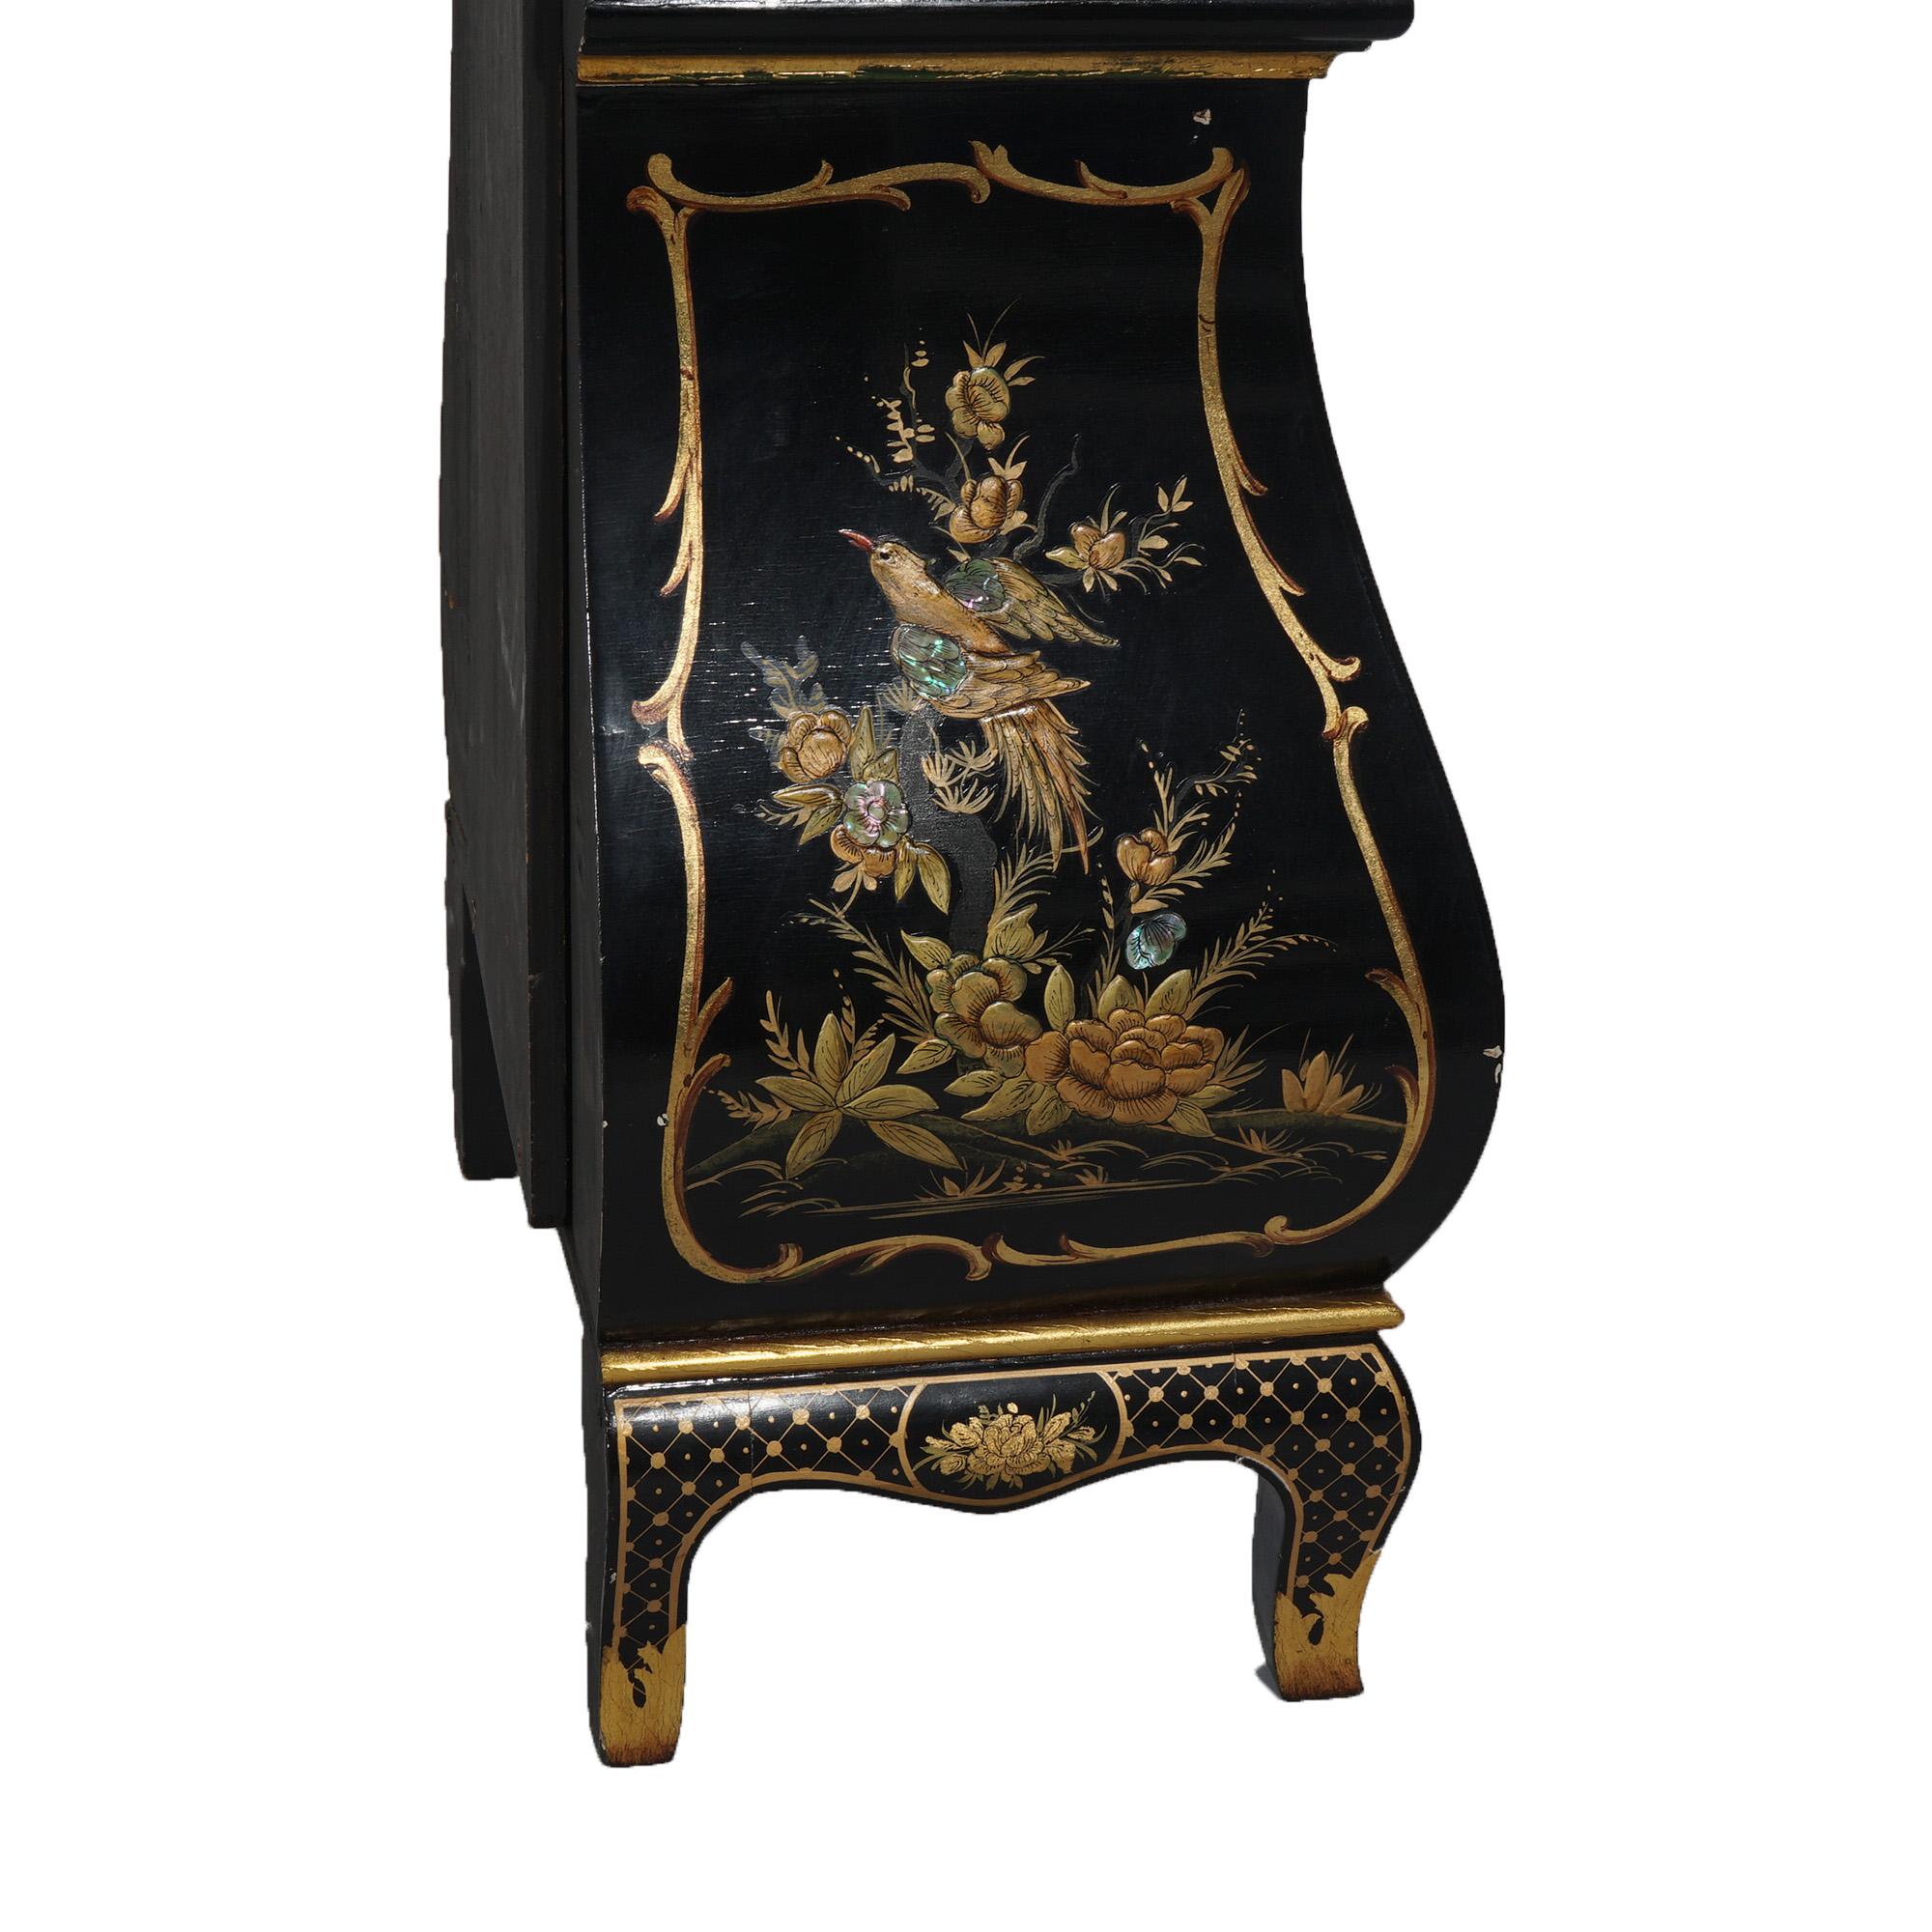 German Chinoiserie Gilt Decorated Black Lacquer Petite Tall Case Clock 20th C 10